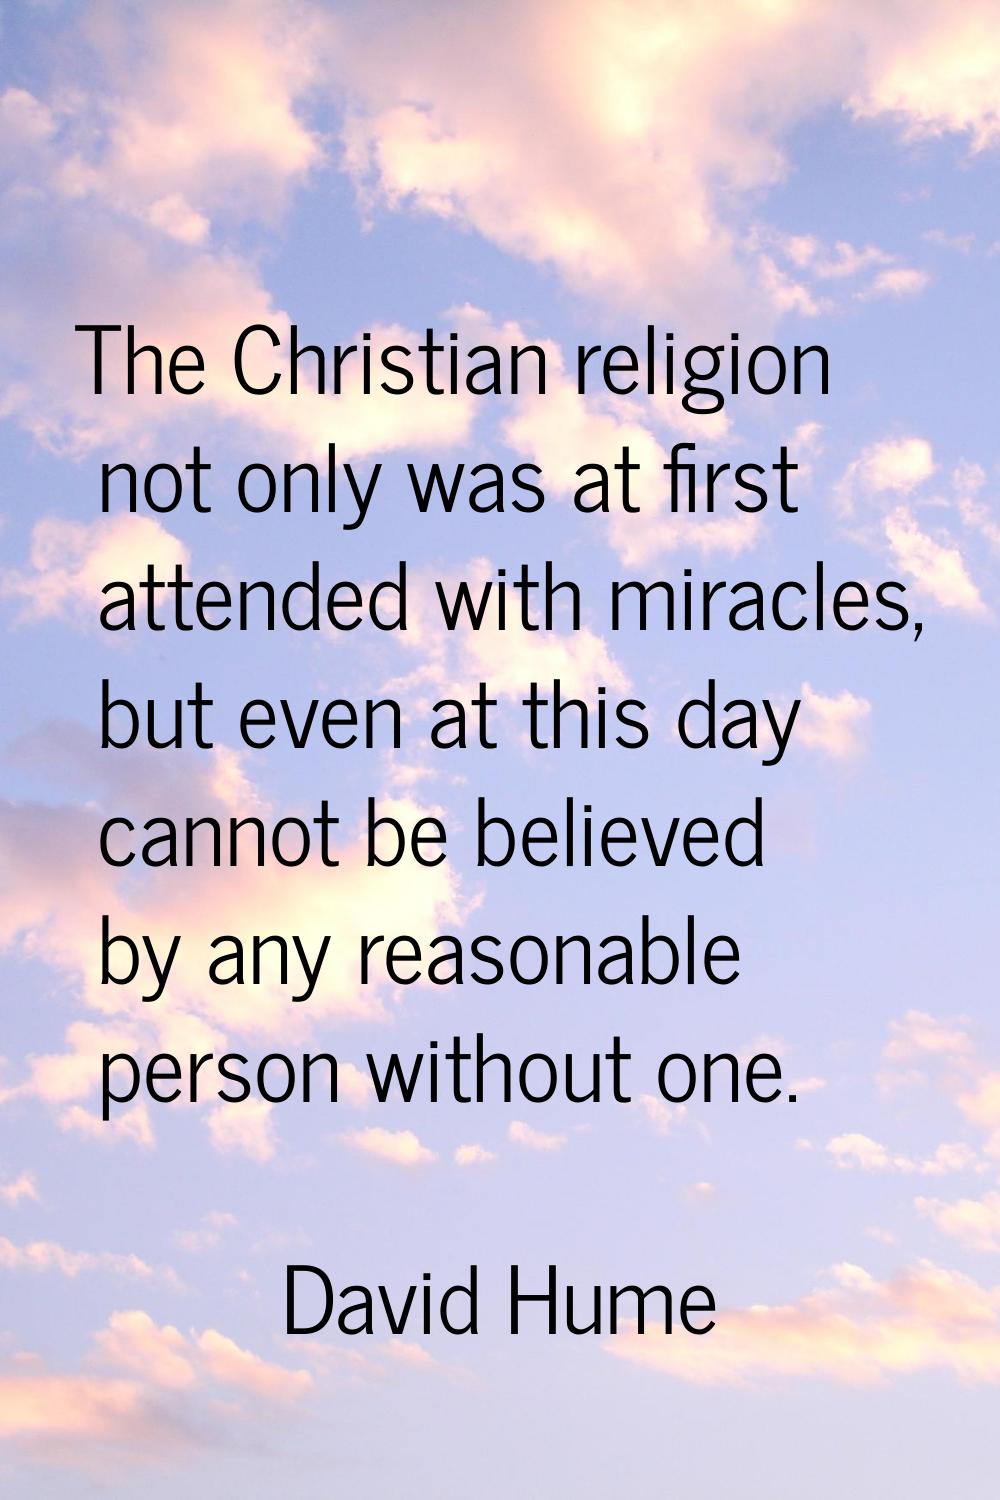 The Christian religion not only was at first attended with miracles, but even at this day cannot be